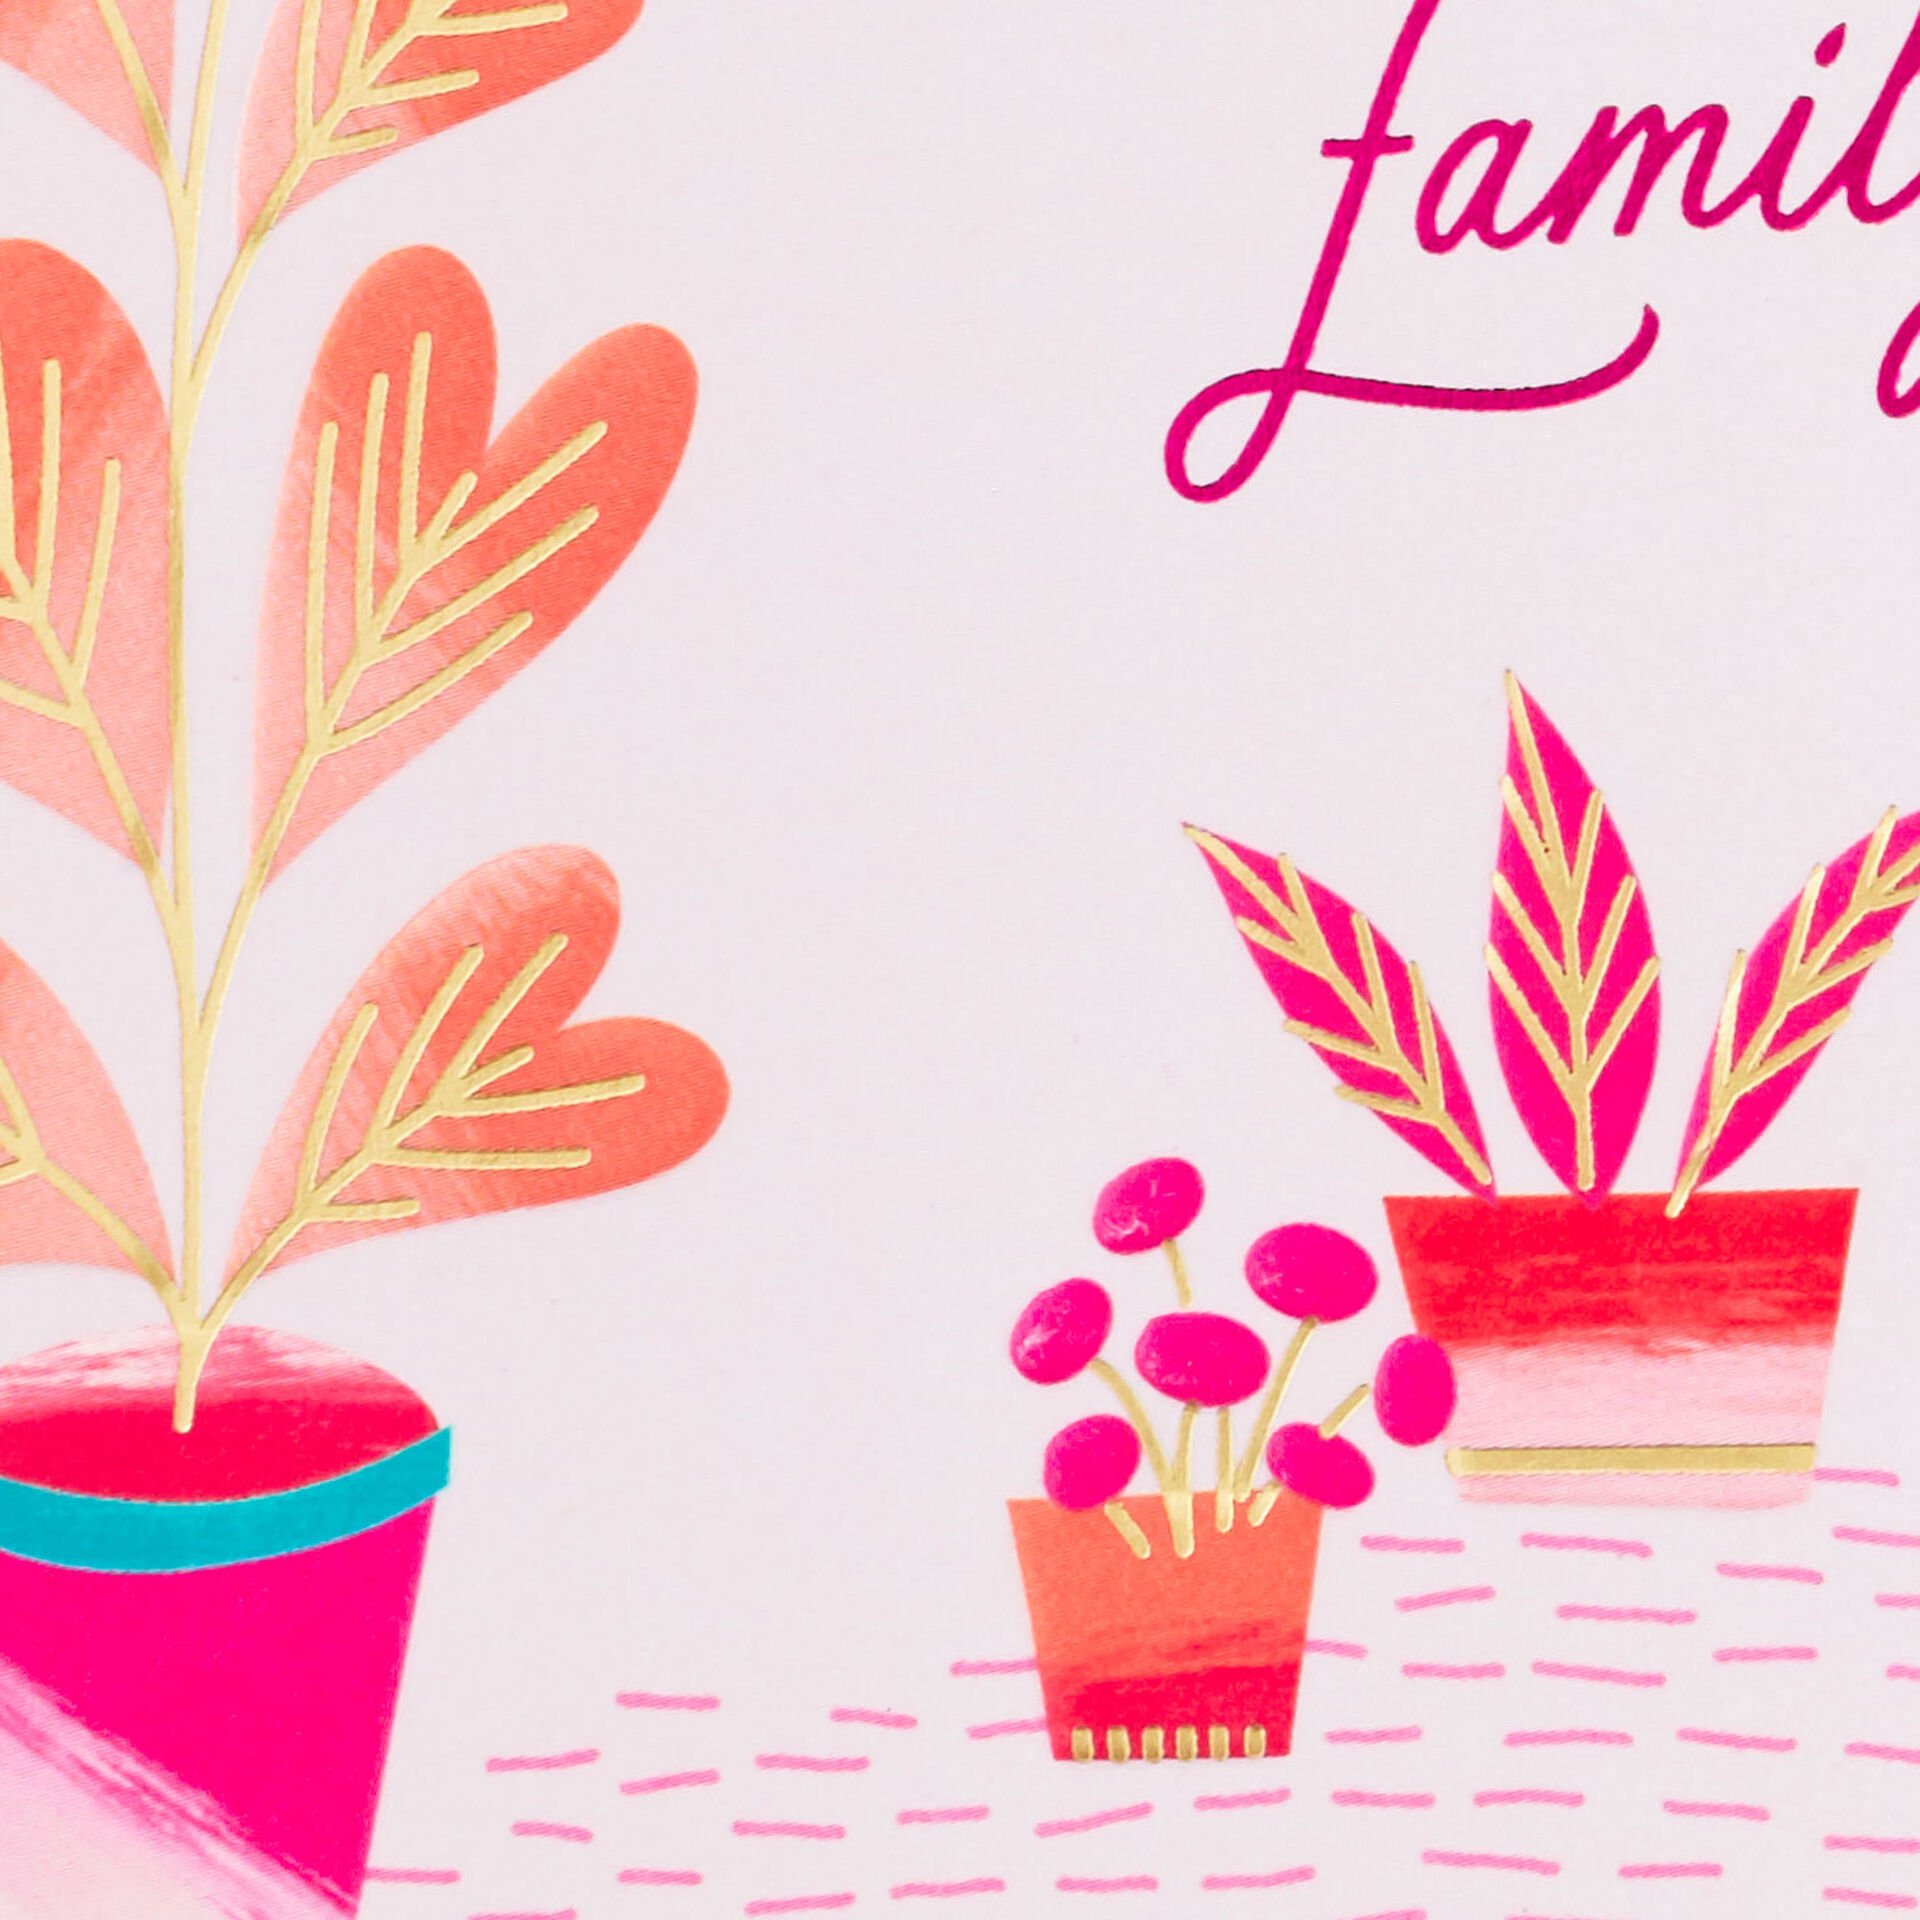 Potted-Plants-Valentines-Day-Card-for-Sister-&-Family_299VEE8823_04.jpeg